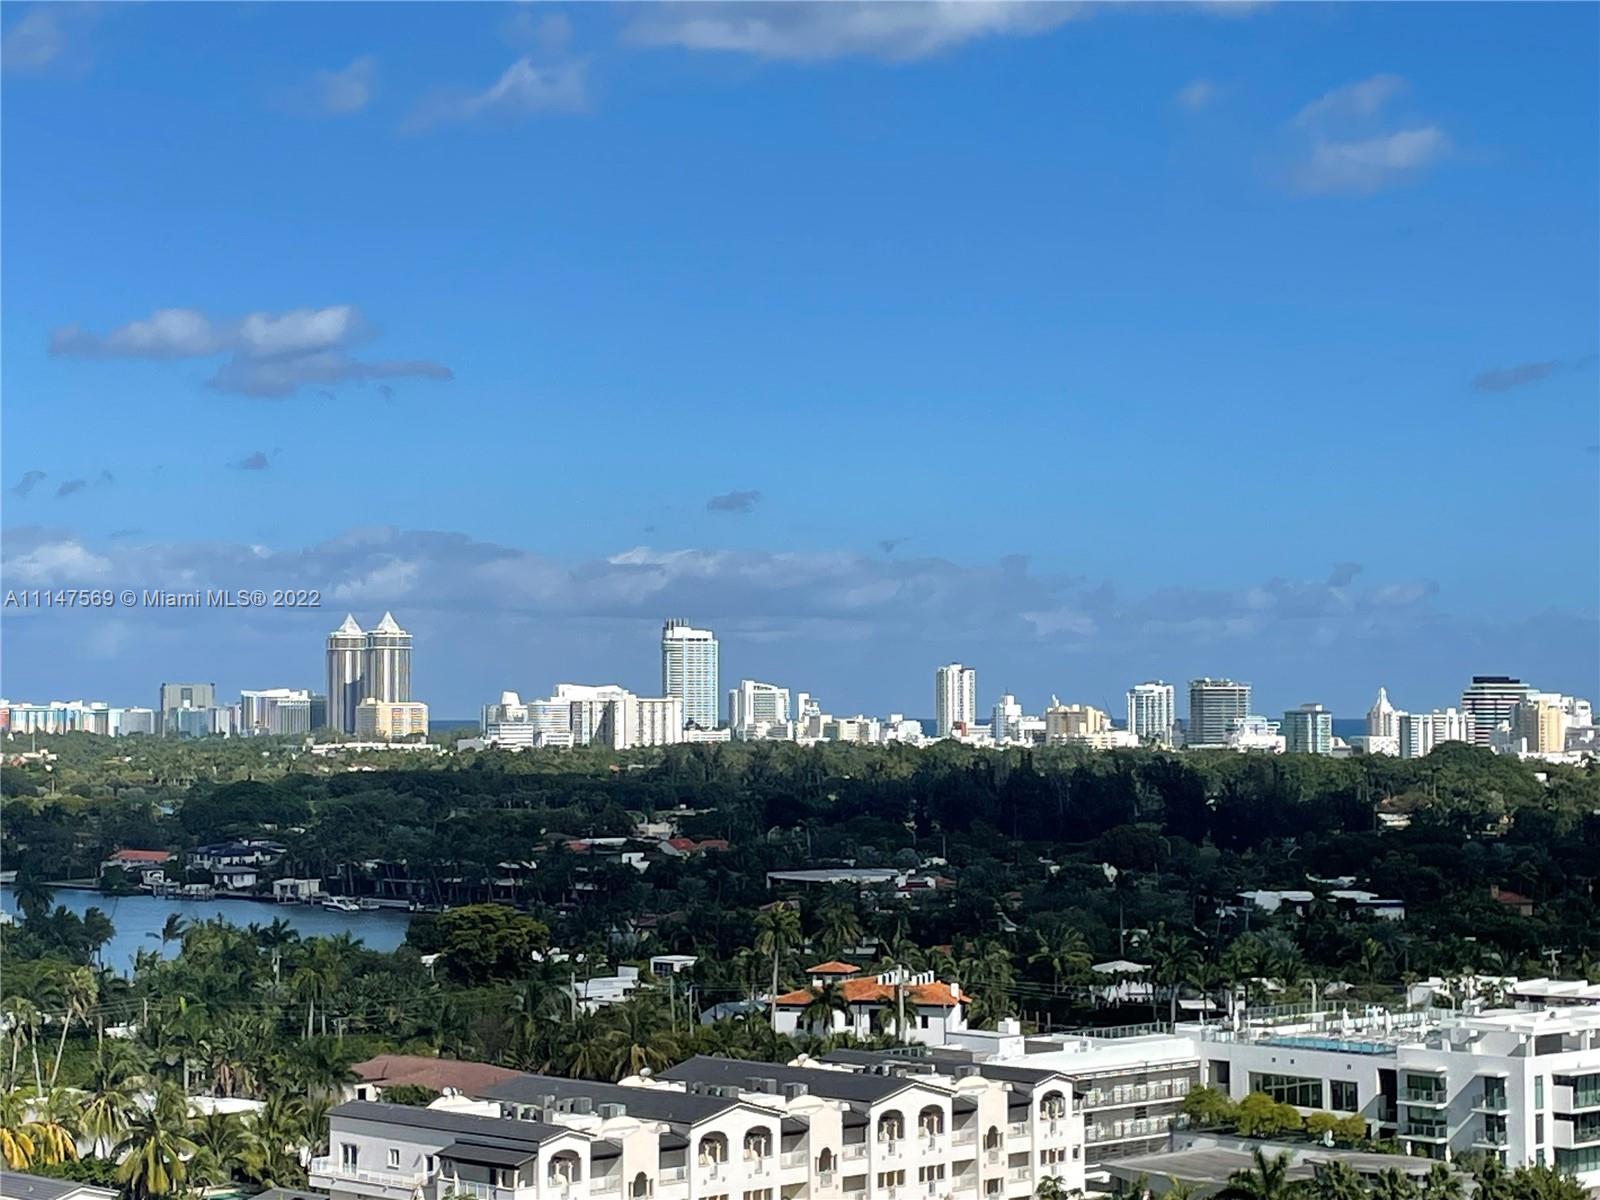 Highest Floor 2/2 on Market!  Panoramic South Beach, golf course + ocean views, framed by floor to ceilings sliding glass walls in every room.  Relax or work from home on an extended 30 foot terrace, with access from every room and complete privacy.  Split bedroom floorplan was modified to double living room space. Two fresh new bathrooms (2020) in today's styles. White kitchen w/ granite + S/S. Newer AC + hot water tank, tile floors, in-unit laundry + hurricane shutters.  The 03 Line at Sunset Harbour has one of the largest terraces and widest views.  Out back, Sunset Harbour Yacht Club would be your new back yard.  Situated in the most active neighborhood in South Beach, surrounded by restaurants, upscale grocers, water sports and fitness boutiques. Away from the crowds + tourists!